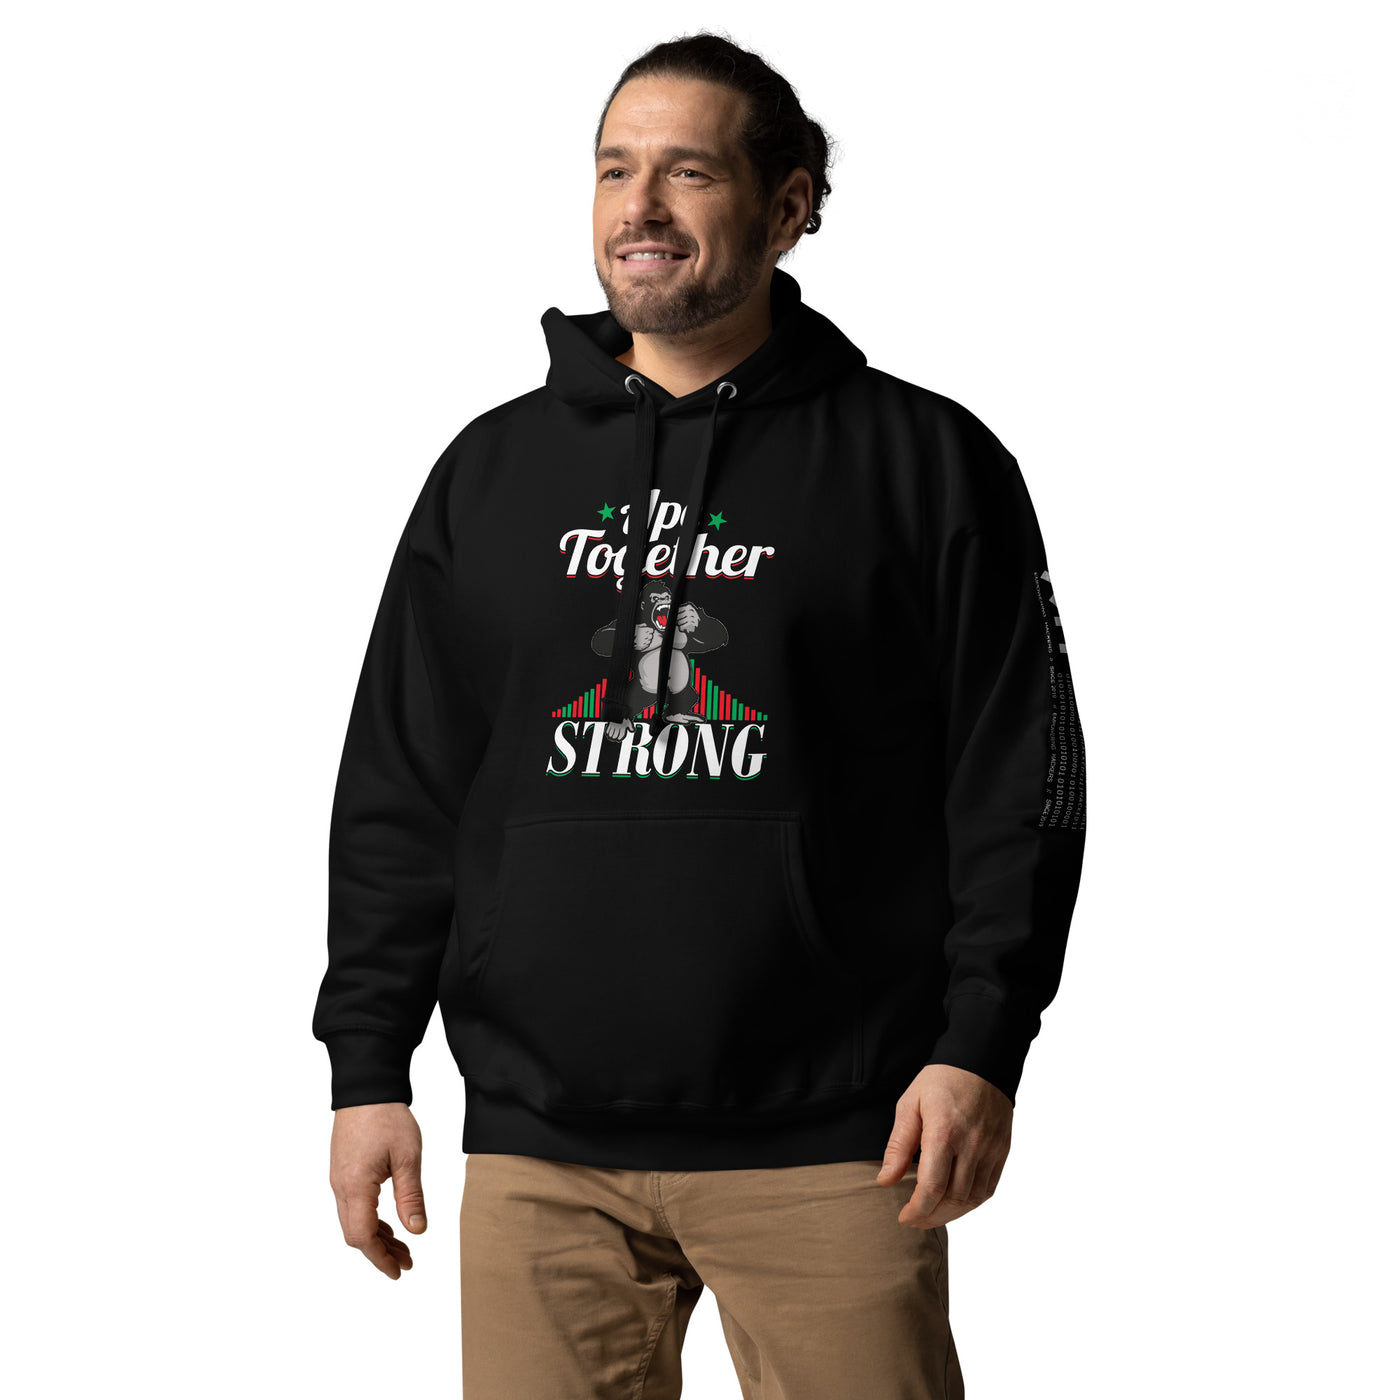 Ape together strong - Unisex Hoodie